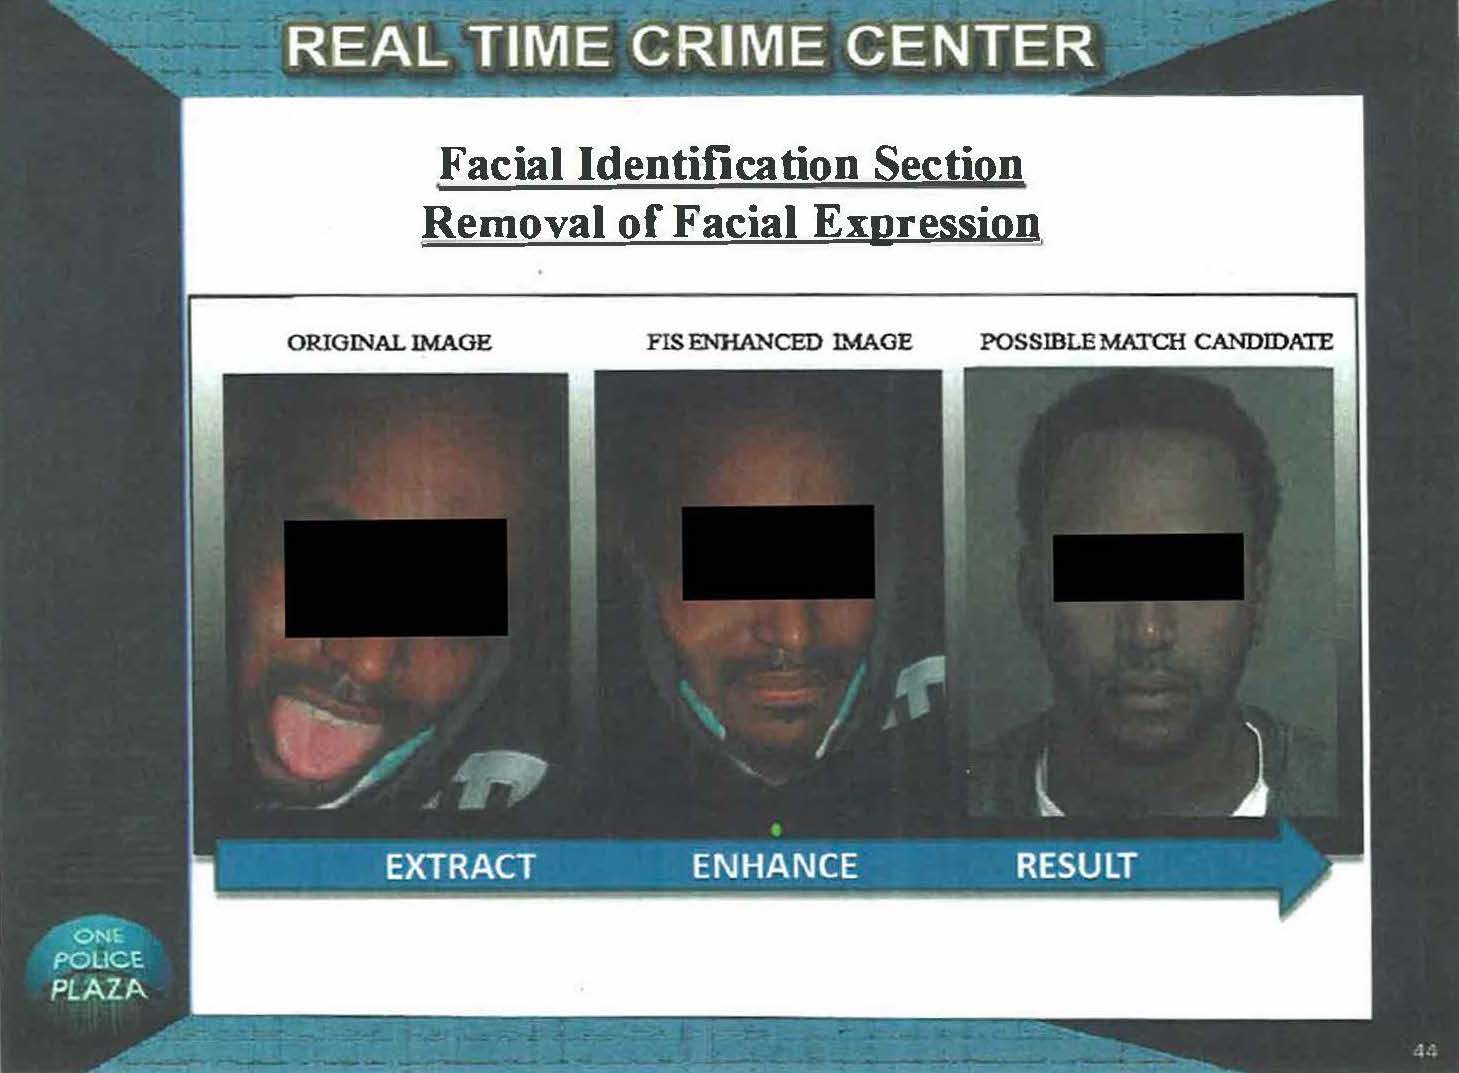 NYPD "removal of facial expression"